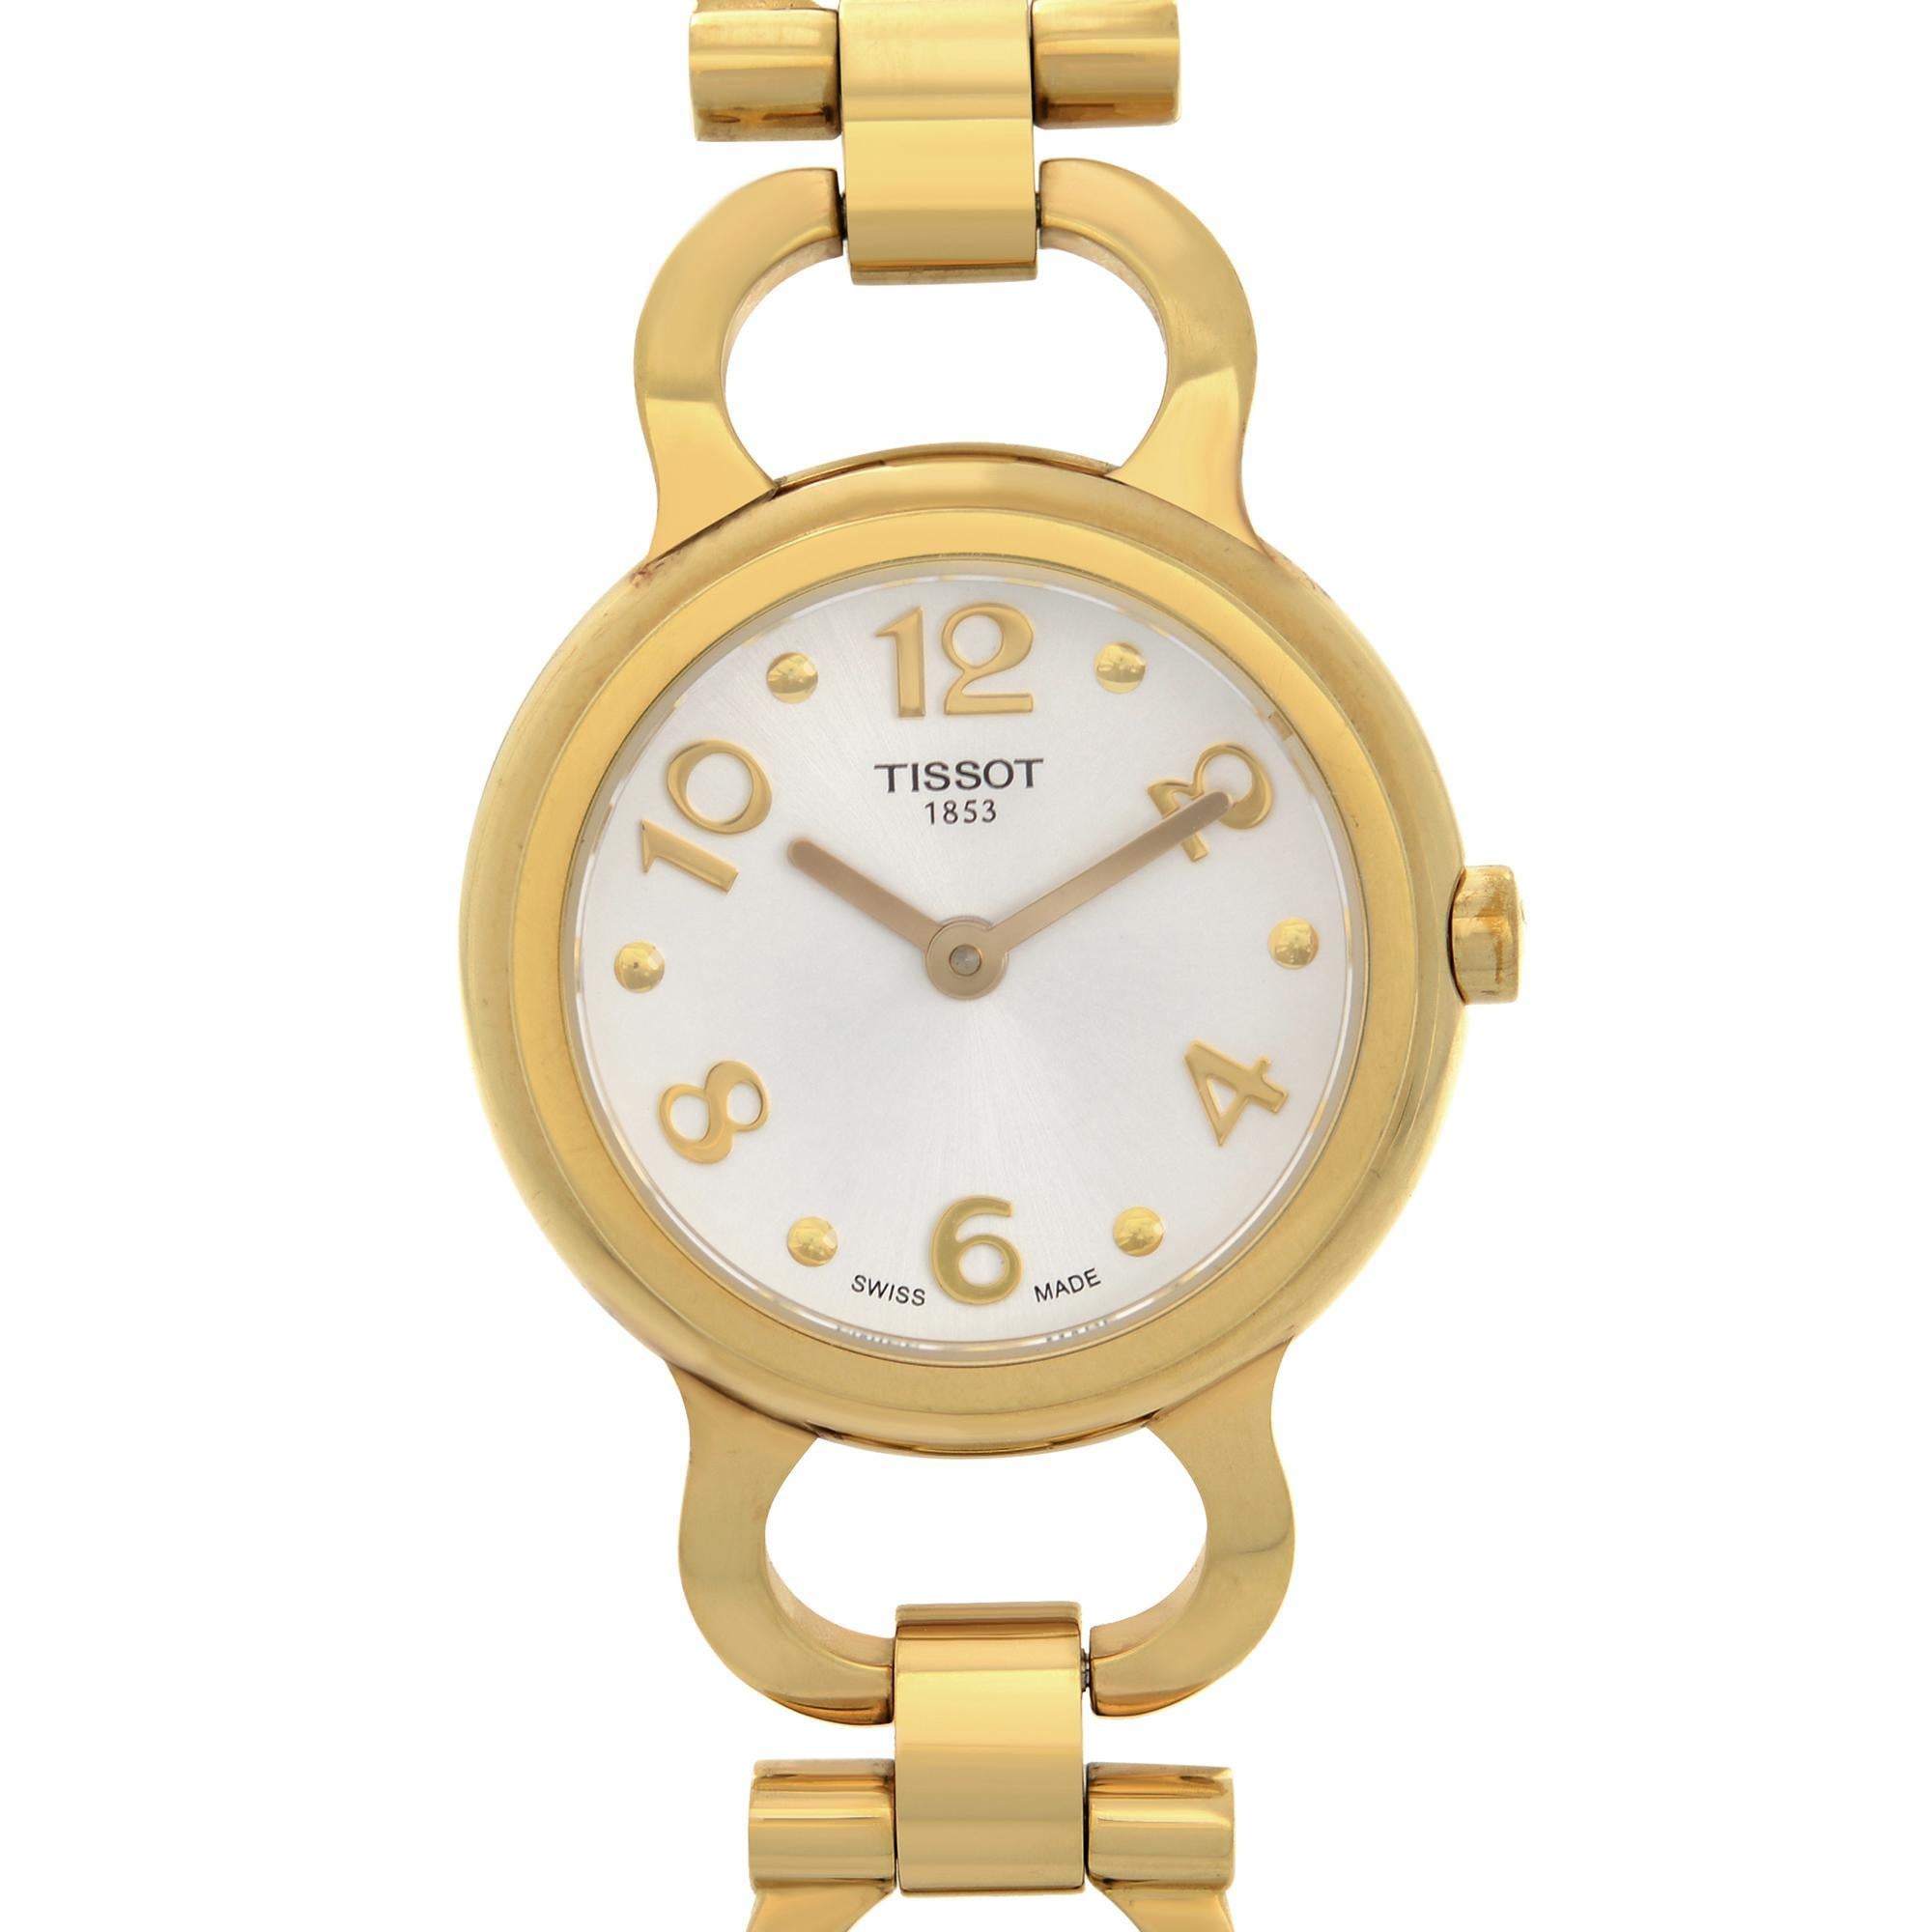 Pre-owned Tissot T-Classic Gold-Tone Steel Silver Dial Ladies Quartz Watch T0290093303701. The Watch has Scratches on the case and bracelet and Minor Oxidation Near the Lugs. This Timepiece is Powered by a Quartz Movement and Features: Gold PVD